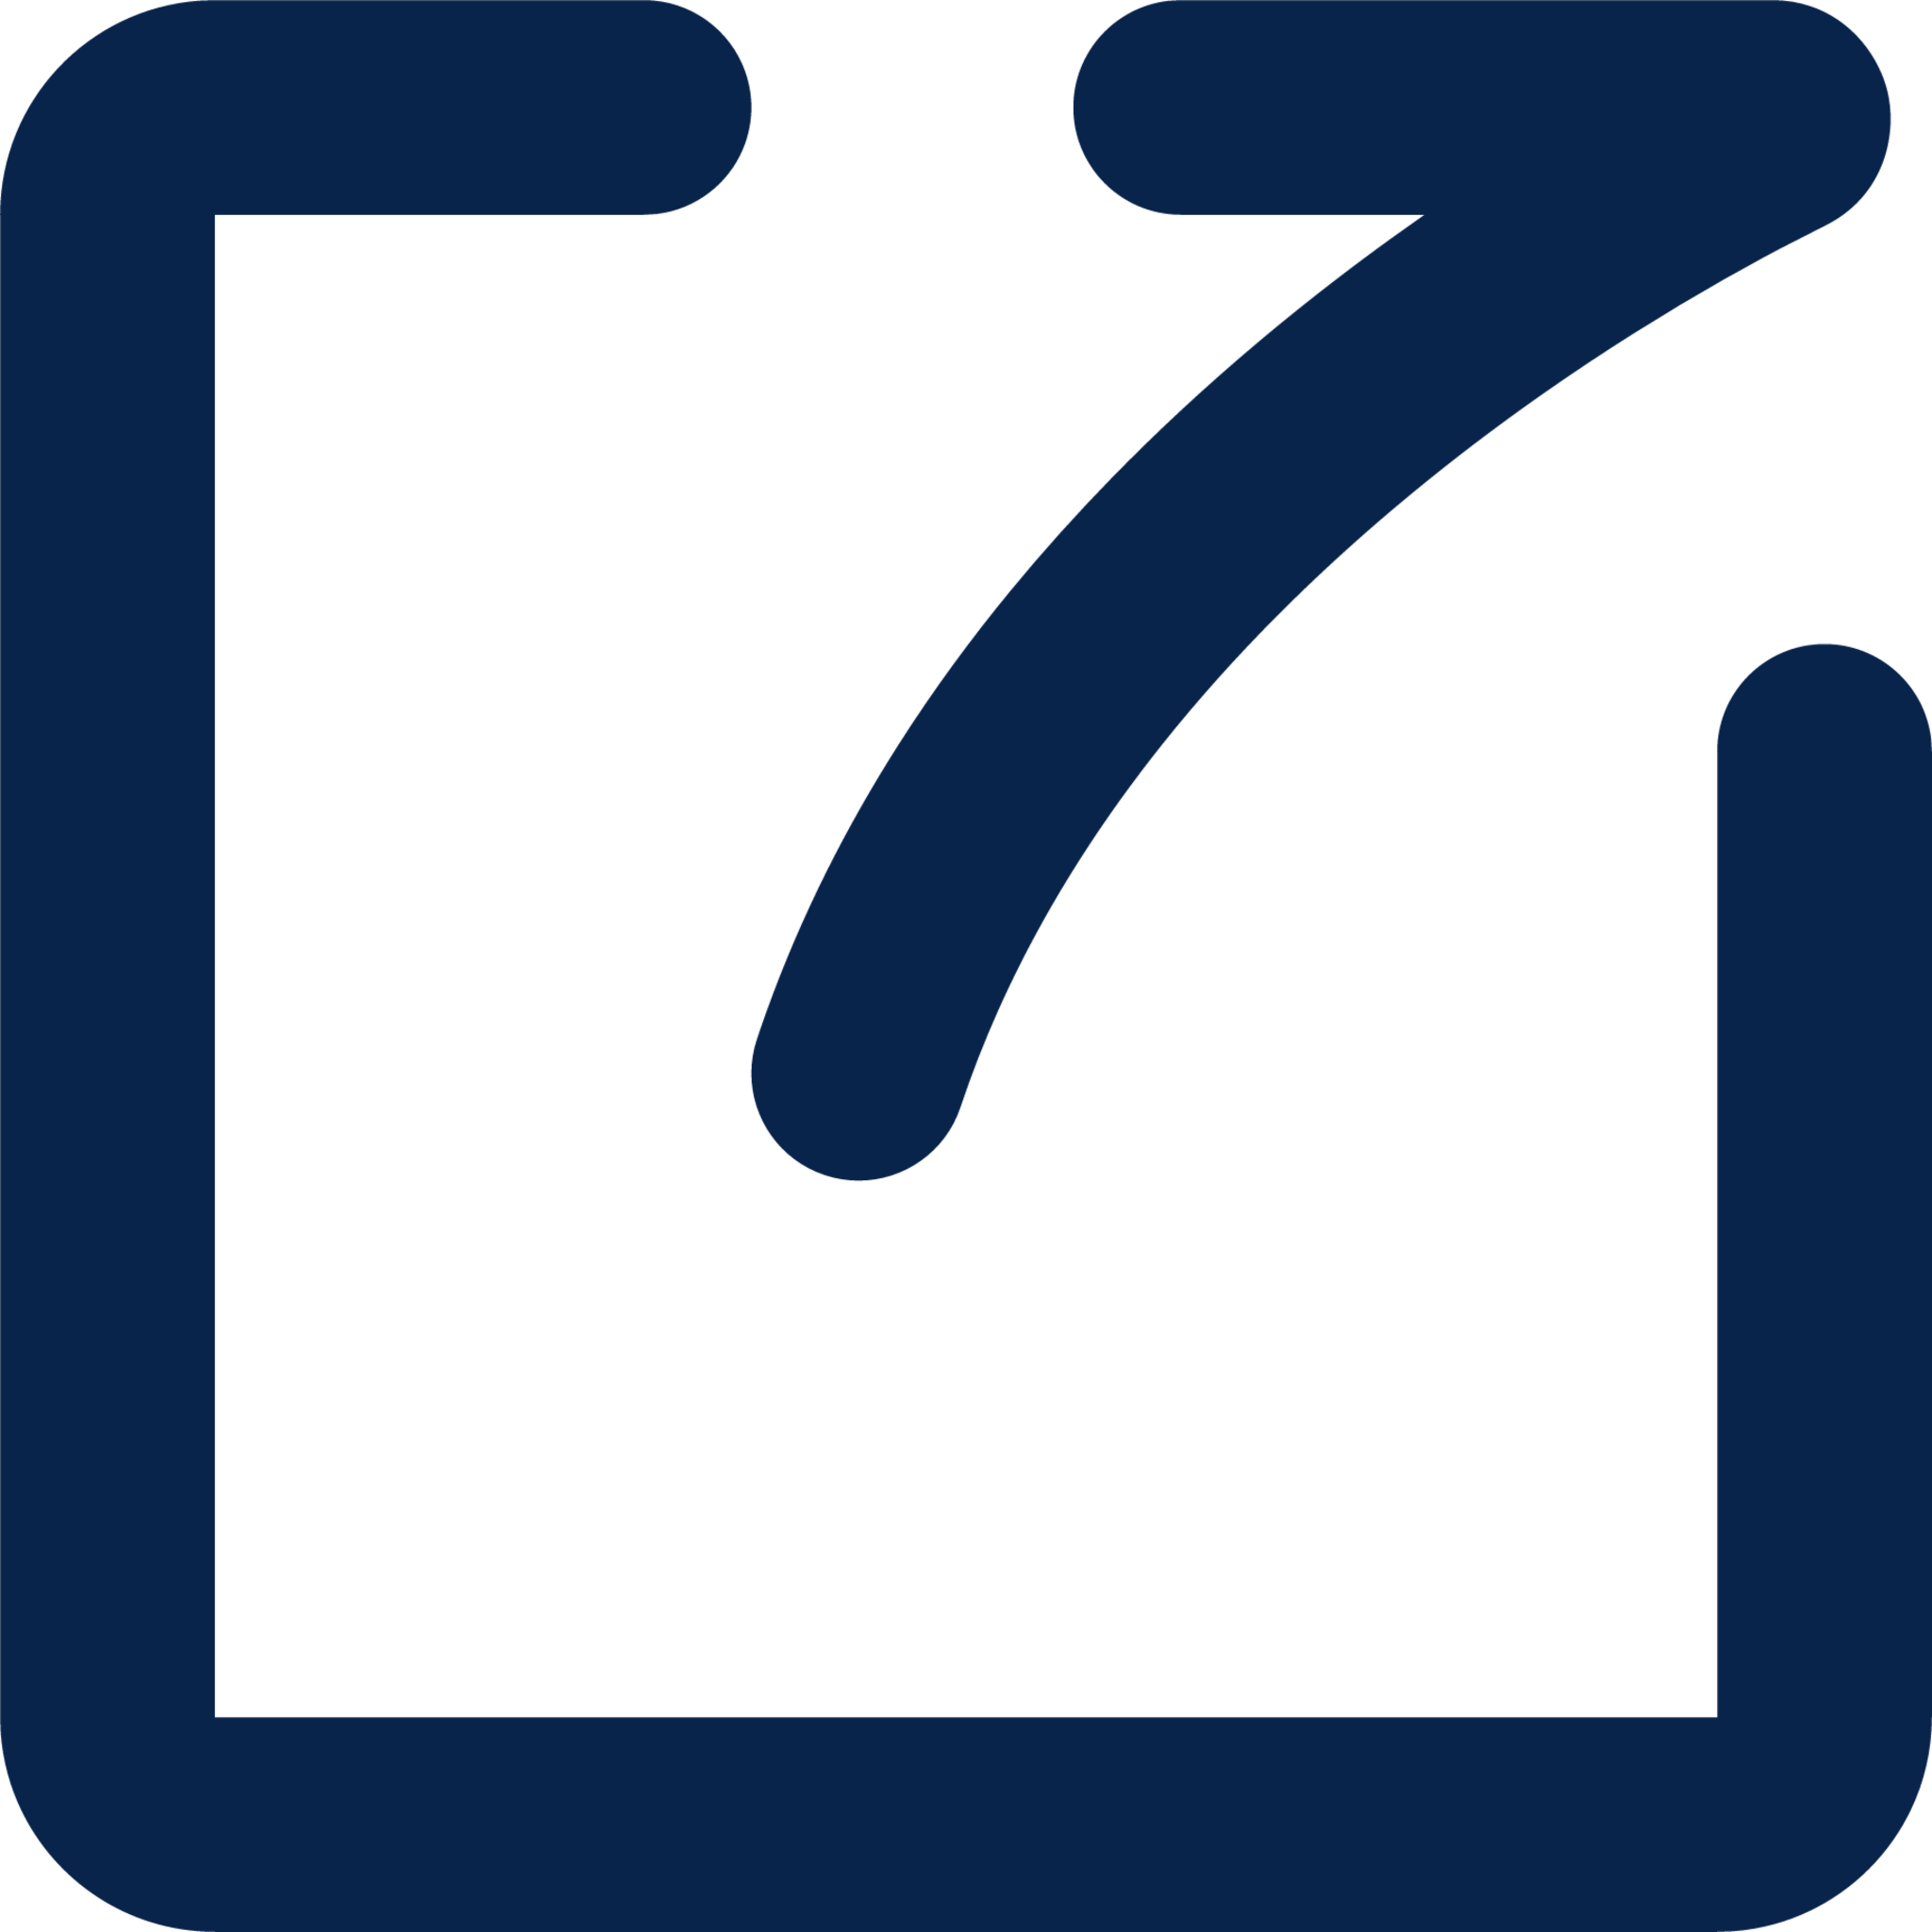 share 3 line system icon